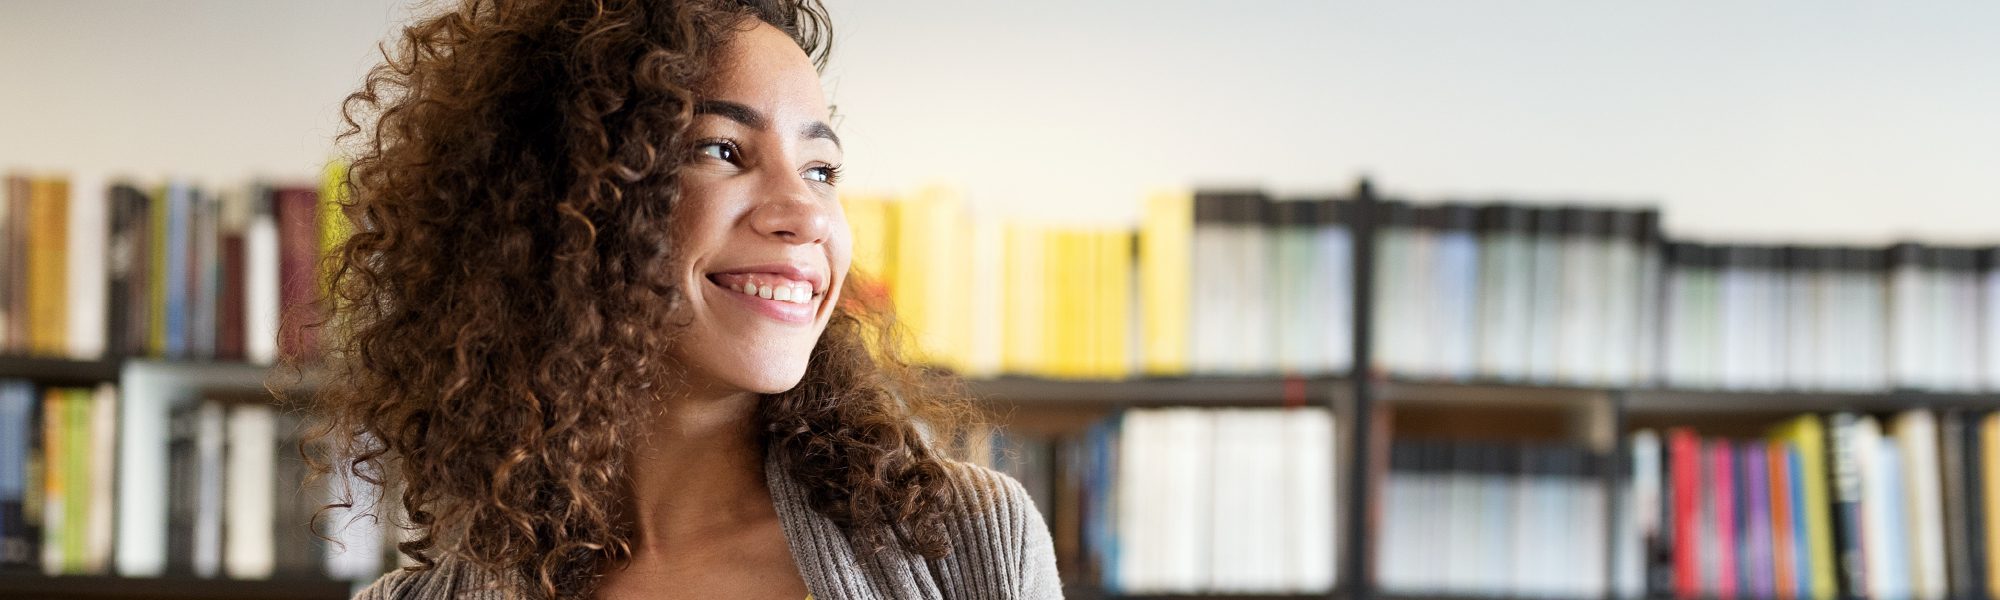 girl in library smiling